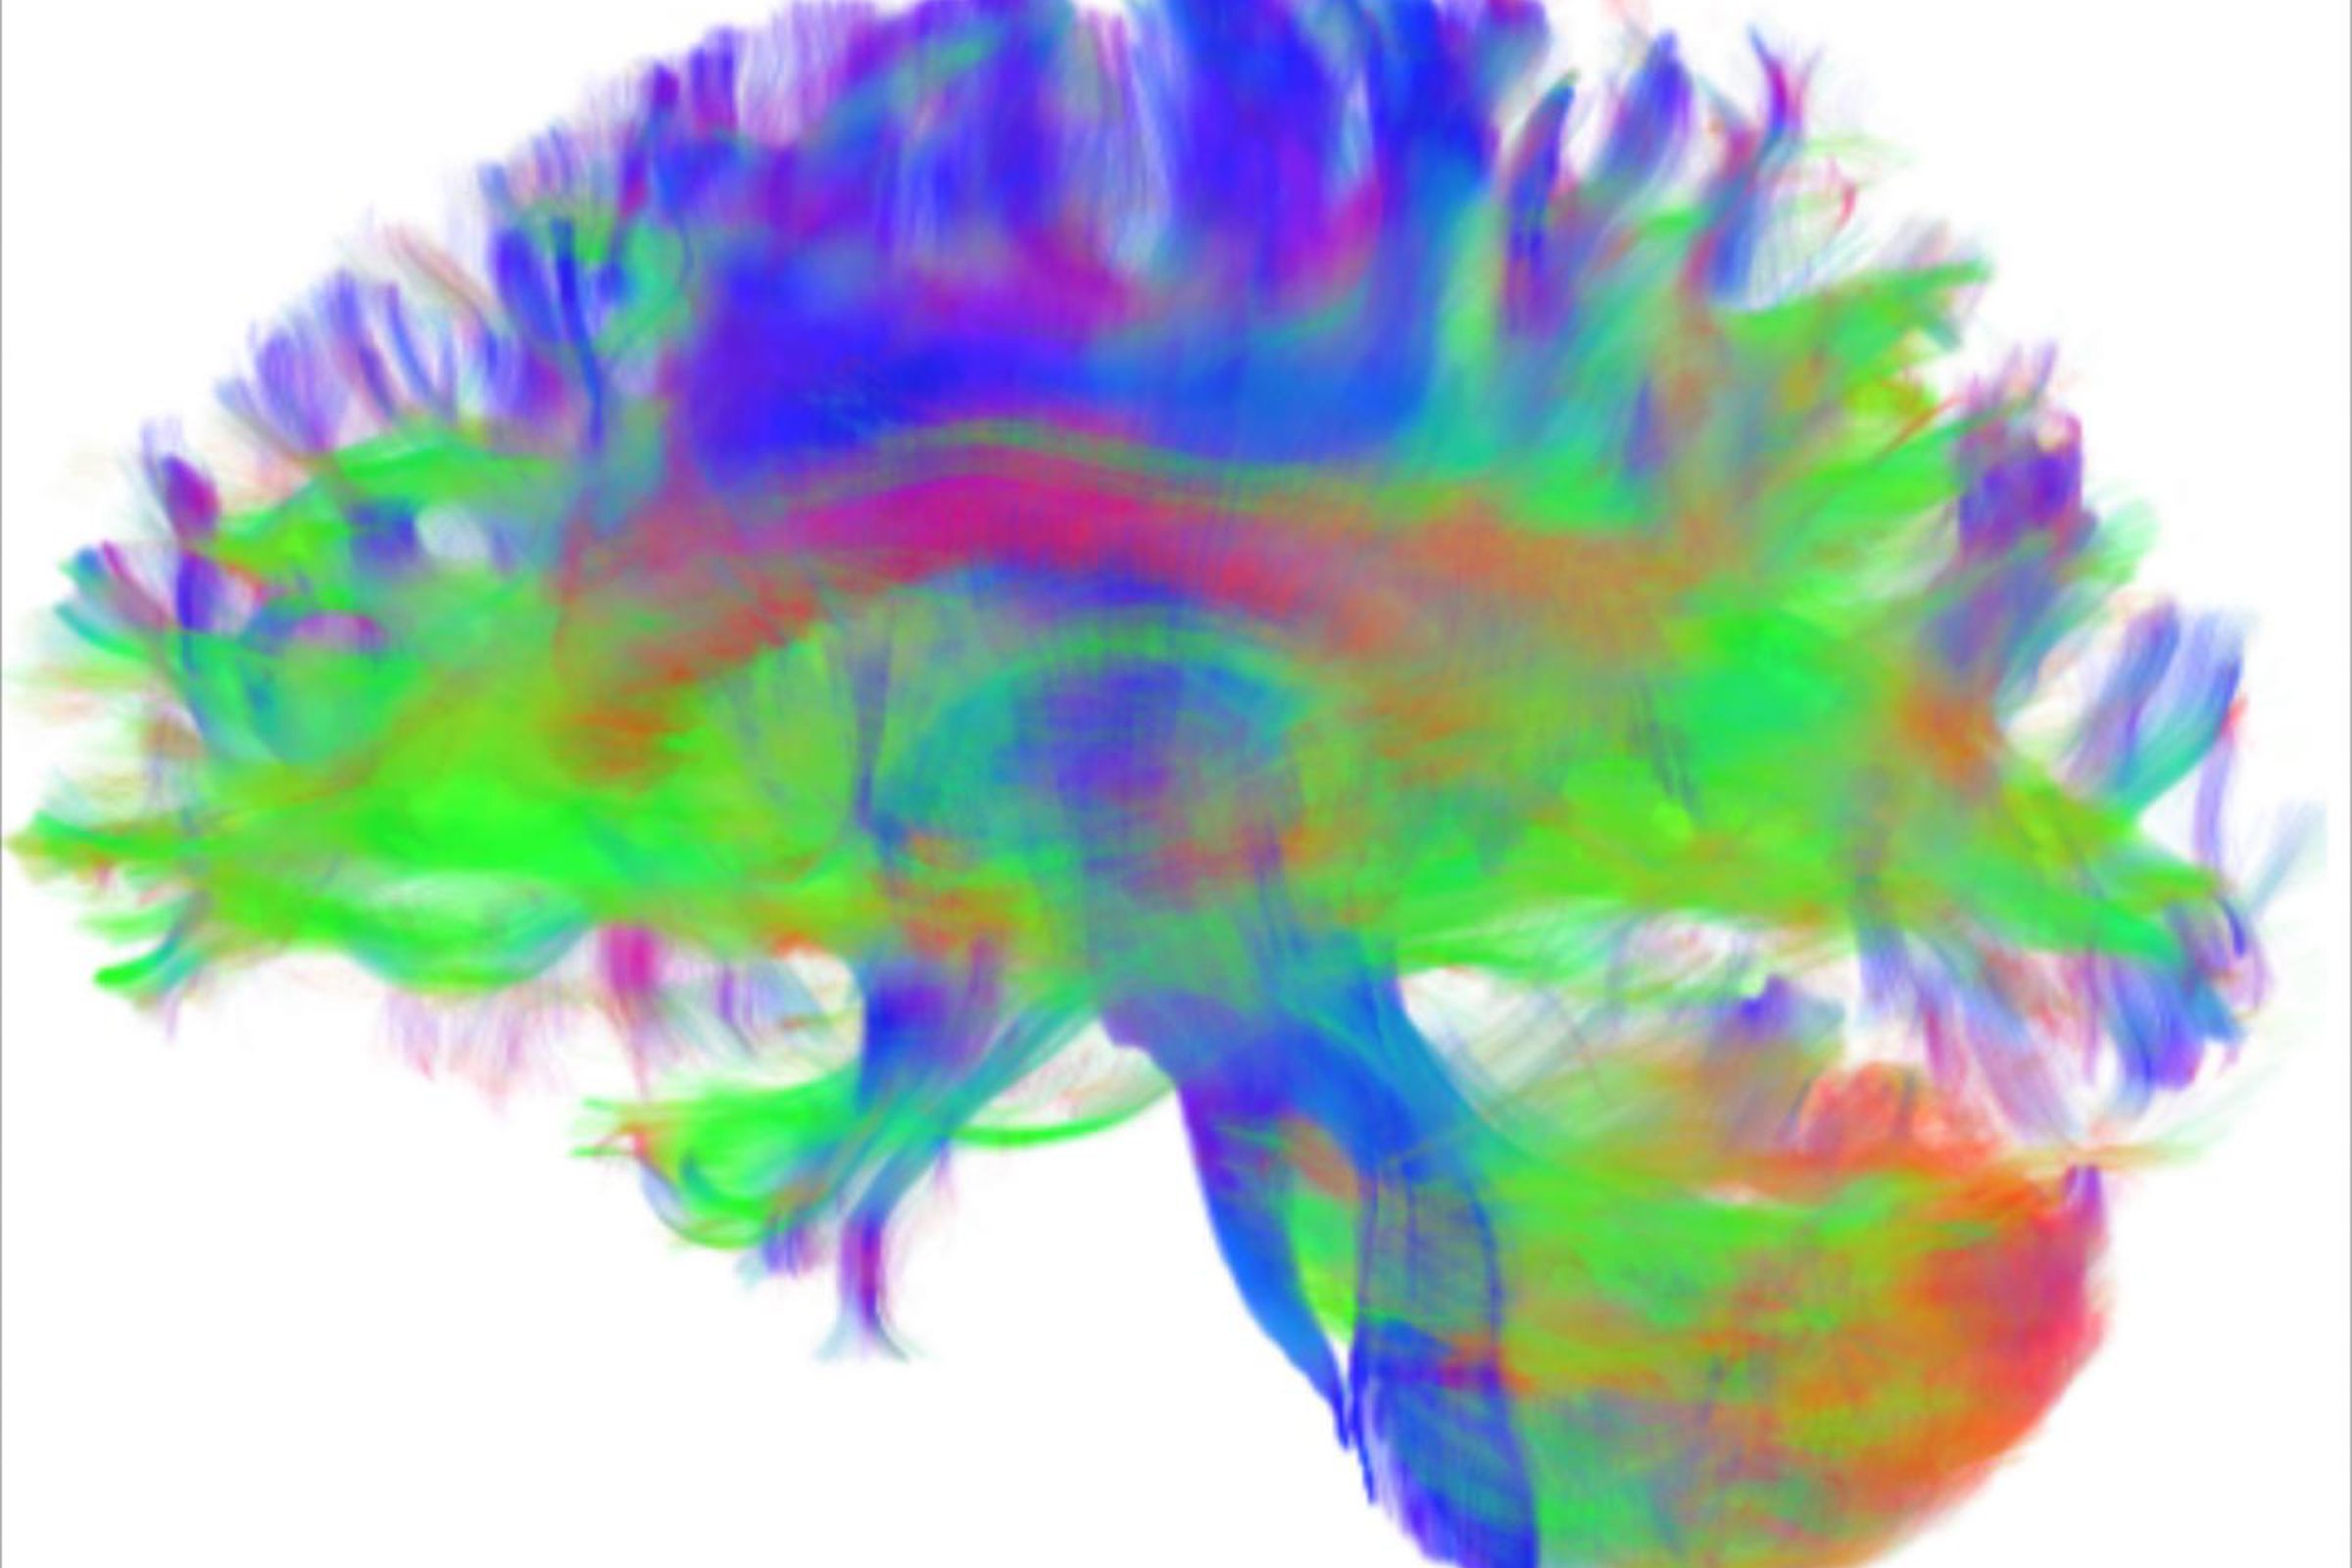 This image is a rendering of diffusion tractography, which was used to reconstruct the anatomical pathways in each participant's brain.